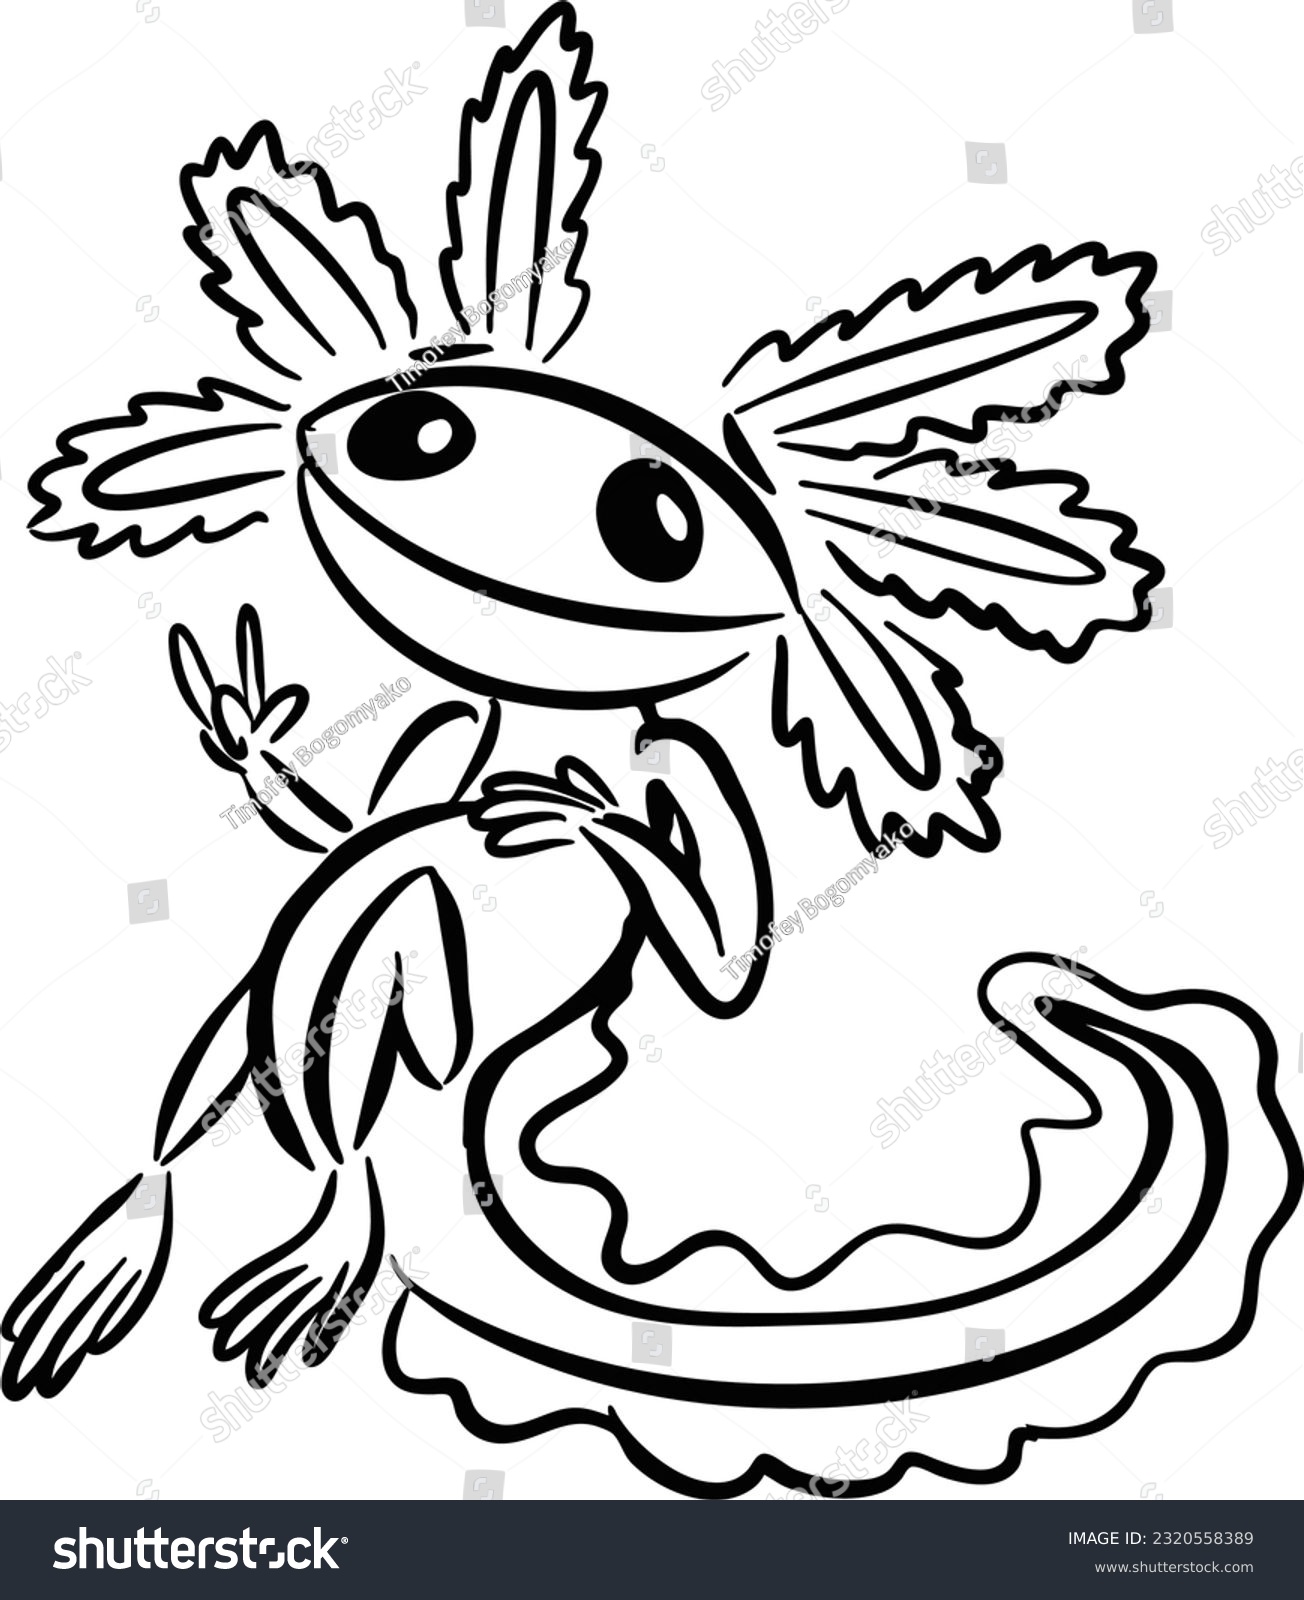 SVG of Vector drawing of happy peaceful Axolotl. Hand drawn, black and white, contour, silhouette, sketch, flat, doodle, cartoon style. Cute,silly,nice,beautiful,animal,amphibia,water,tail,eyes,character. svg